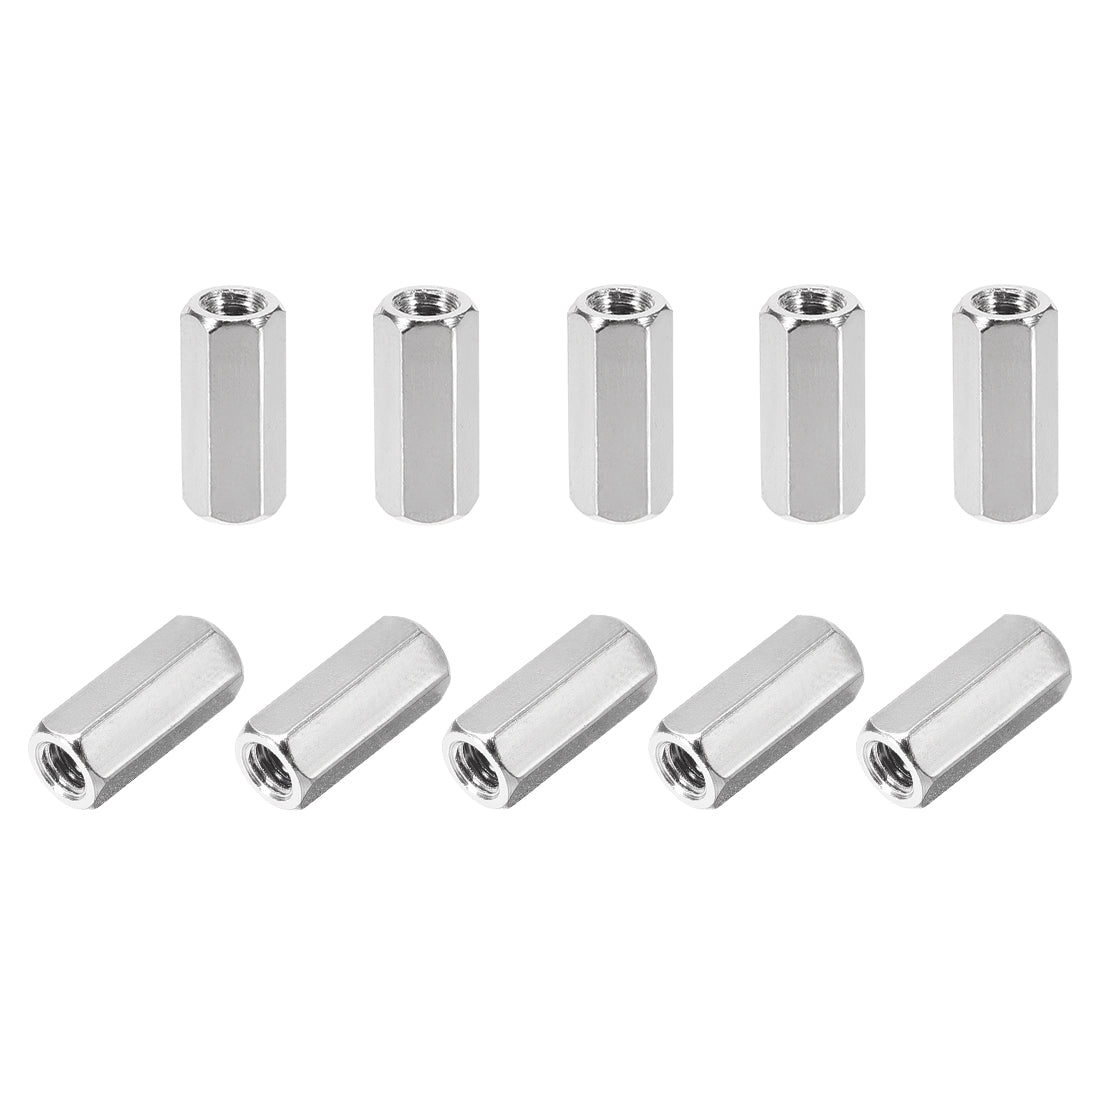 Uxcell Uxcell M4 x 40mm Female to Female Hex Nickel Plated Spacer Standoff 20pcs